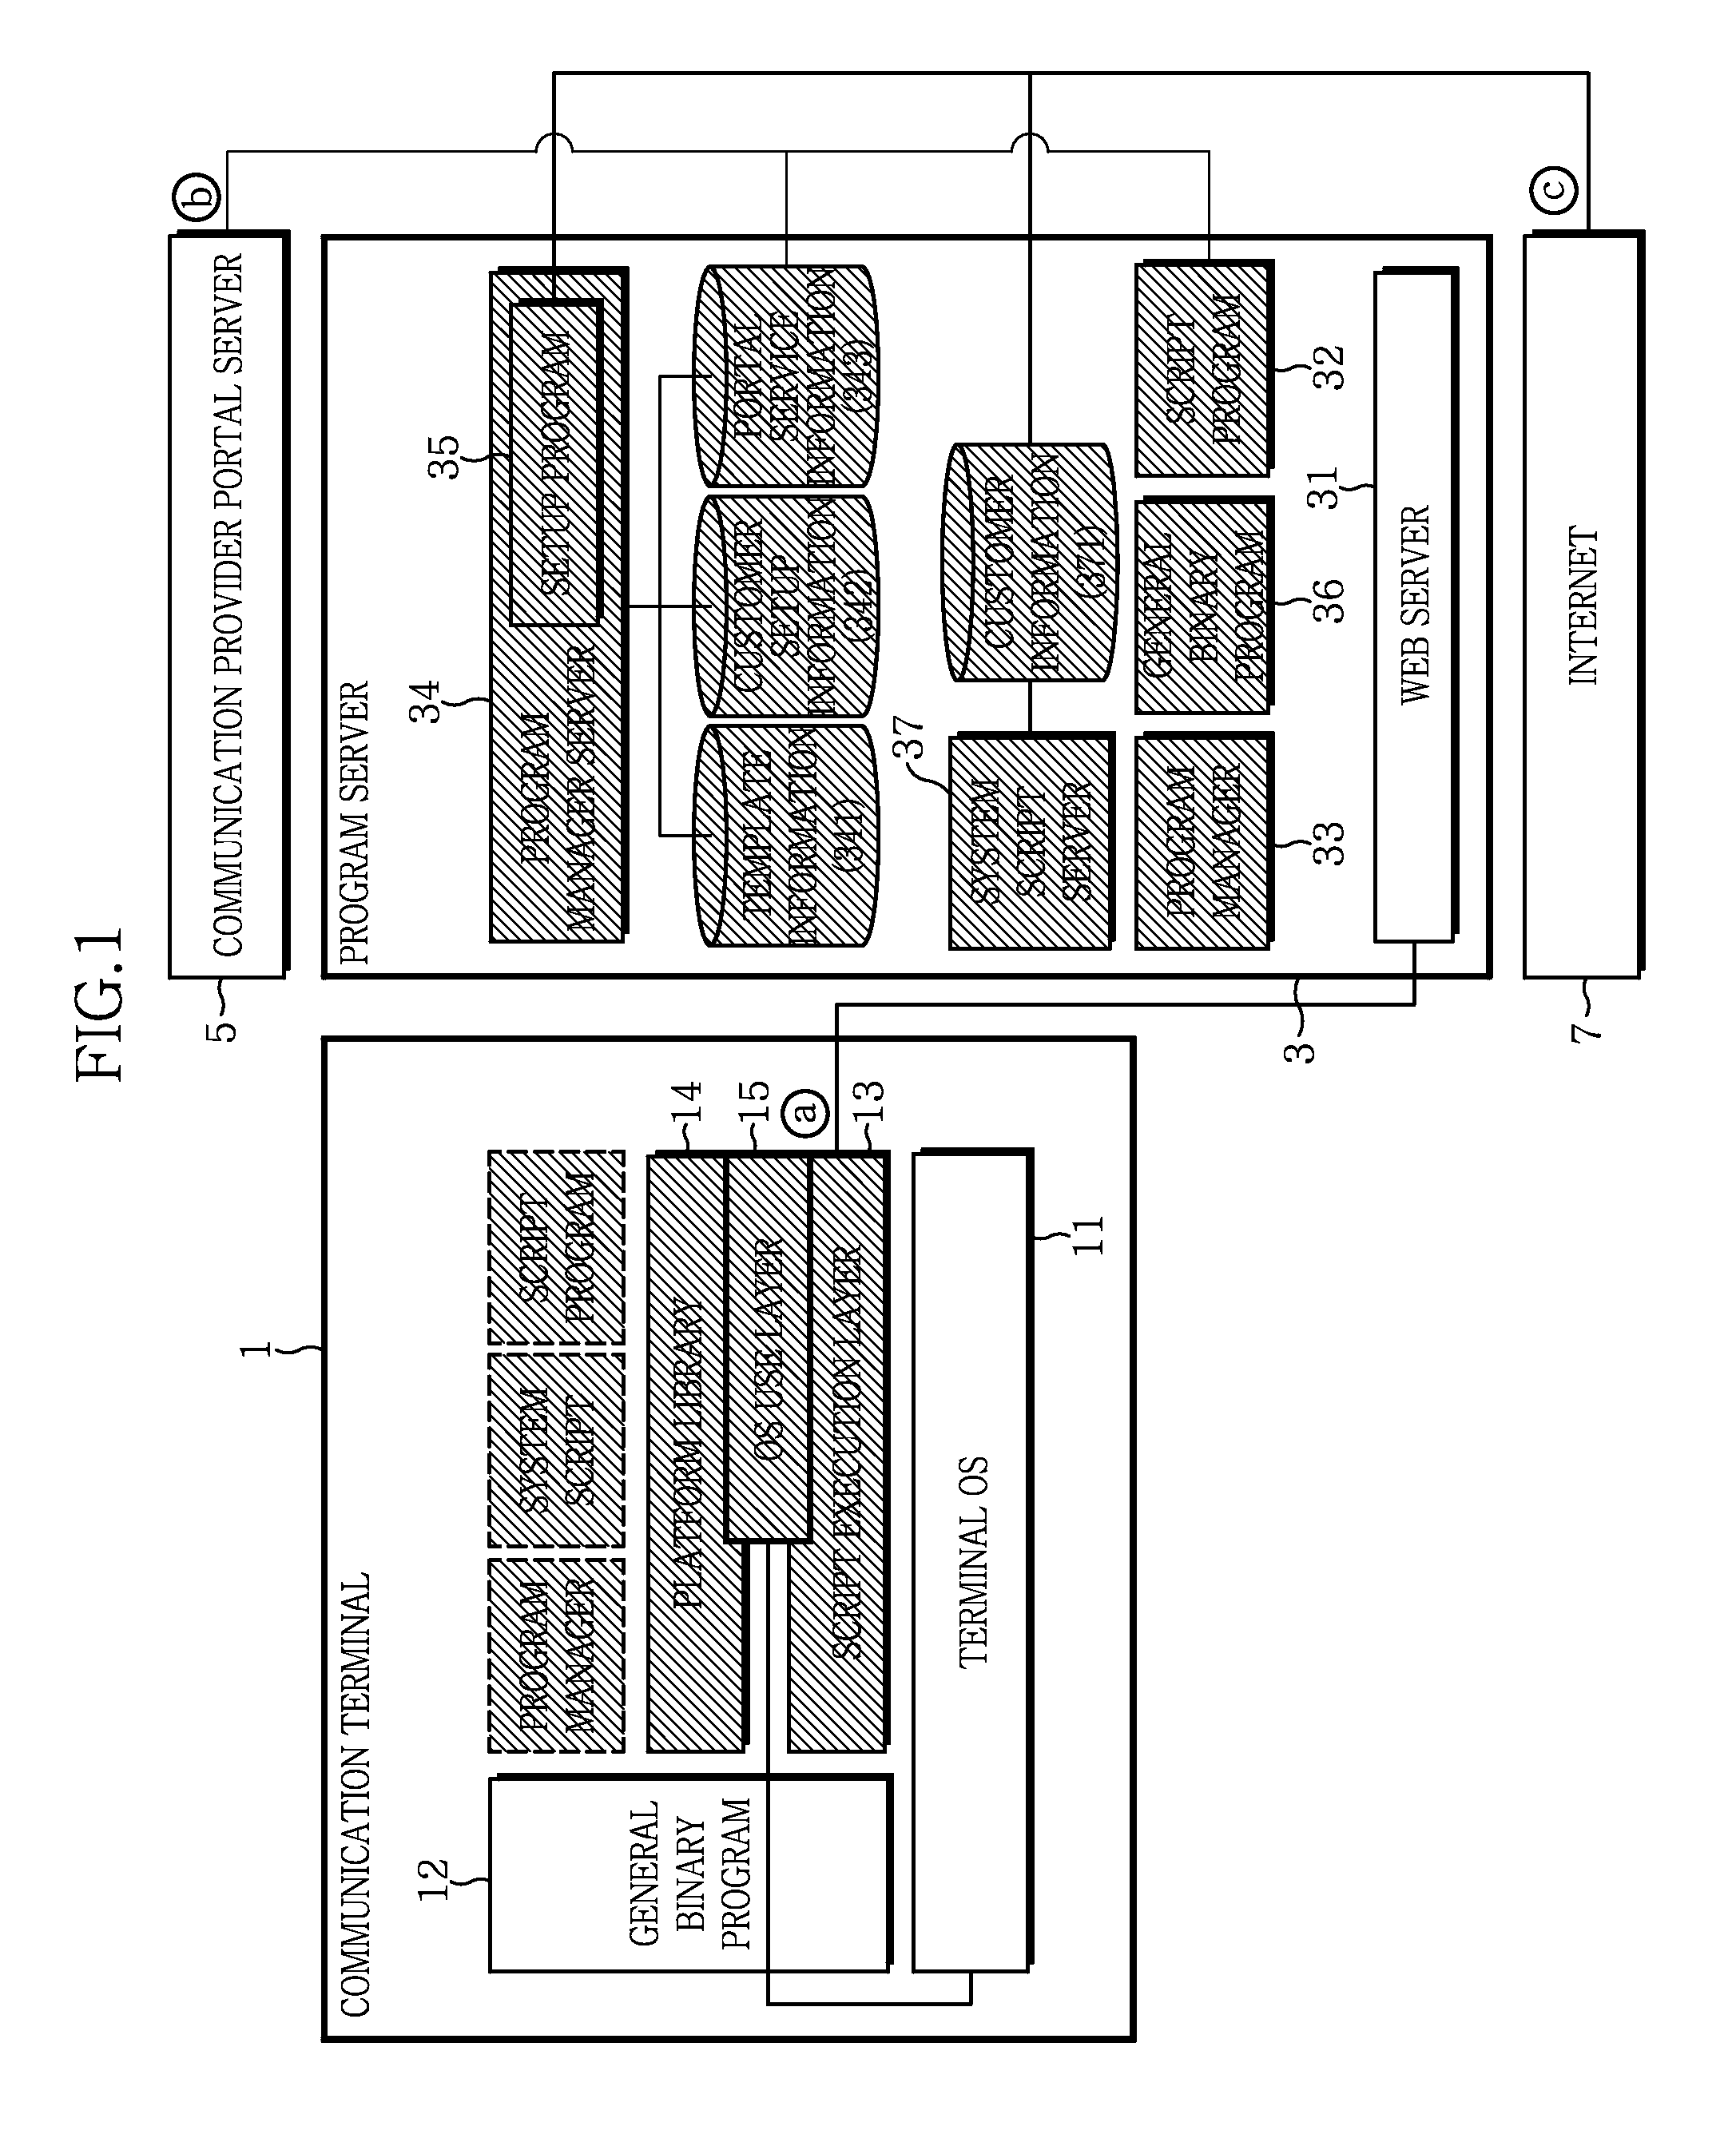 Apparatus for implementing web-based user interface for communication terminal and method thereof